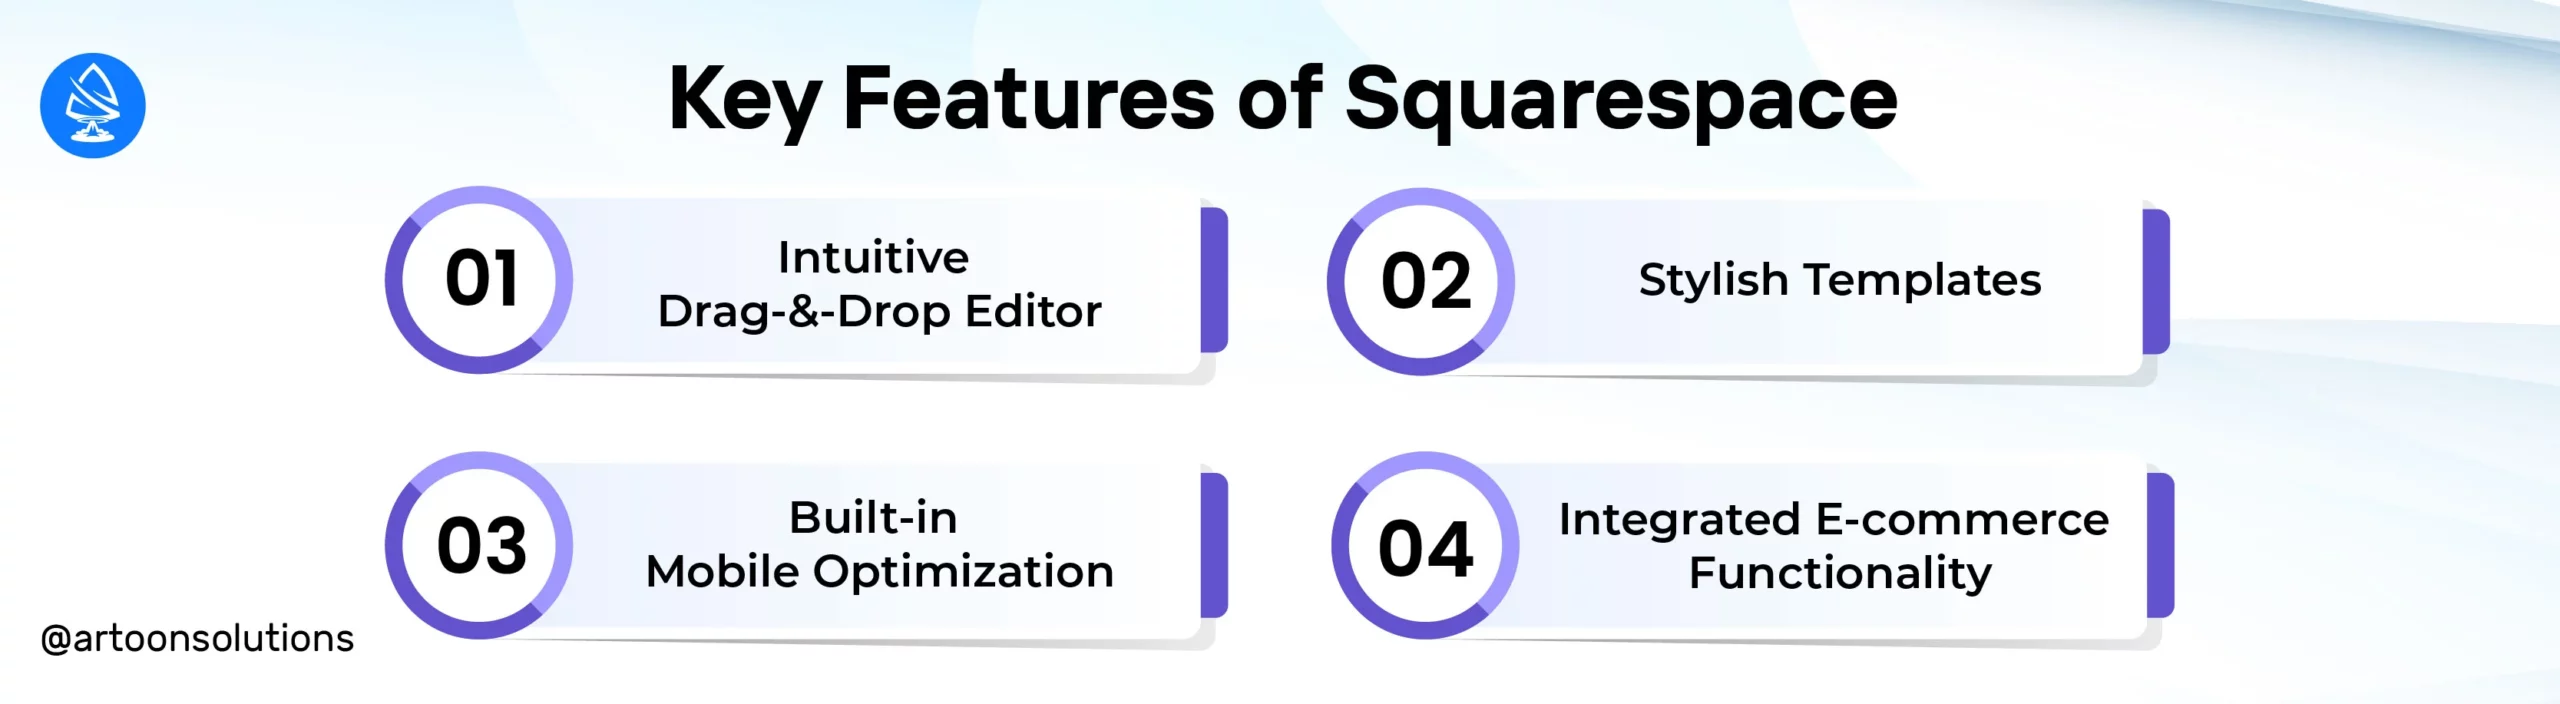 Key Features of Squarespace 